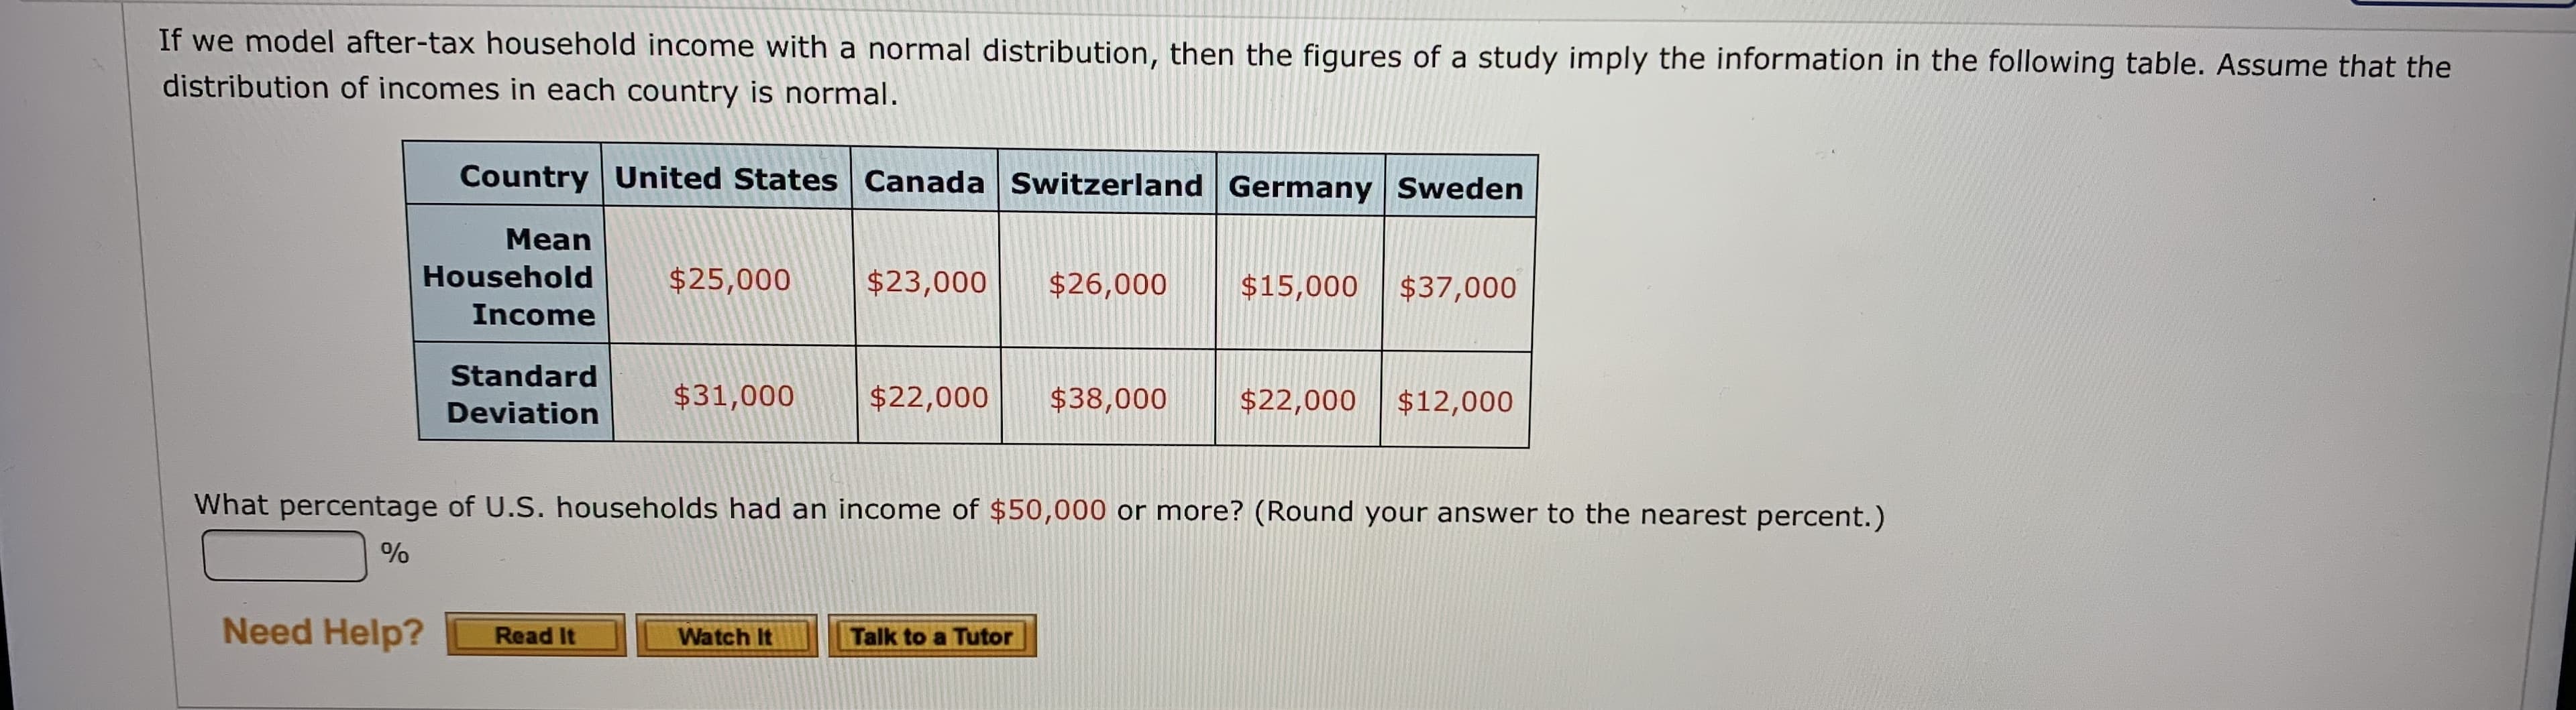 If we model after-tax household income with a normal distribution, then the figures of a study imply the information in the following table. Assume that the
distribution of incomes in each country is normal.
Country United States Canada Switzerland Germany Sweden
Mean
Household
$25,000
$23,000
$26,000
$15,000
$37,000
Income
Standard
$31,000
$22,000
$38,000
$22,000
$12,000
Deviation
What percentage of U.S. households had an income of $50,000 or more? (Round your answer to the nearest percent.)
